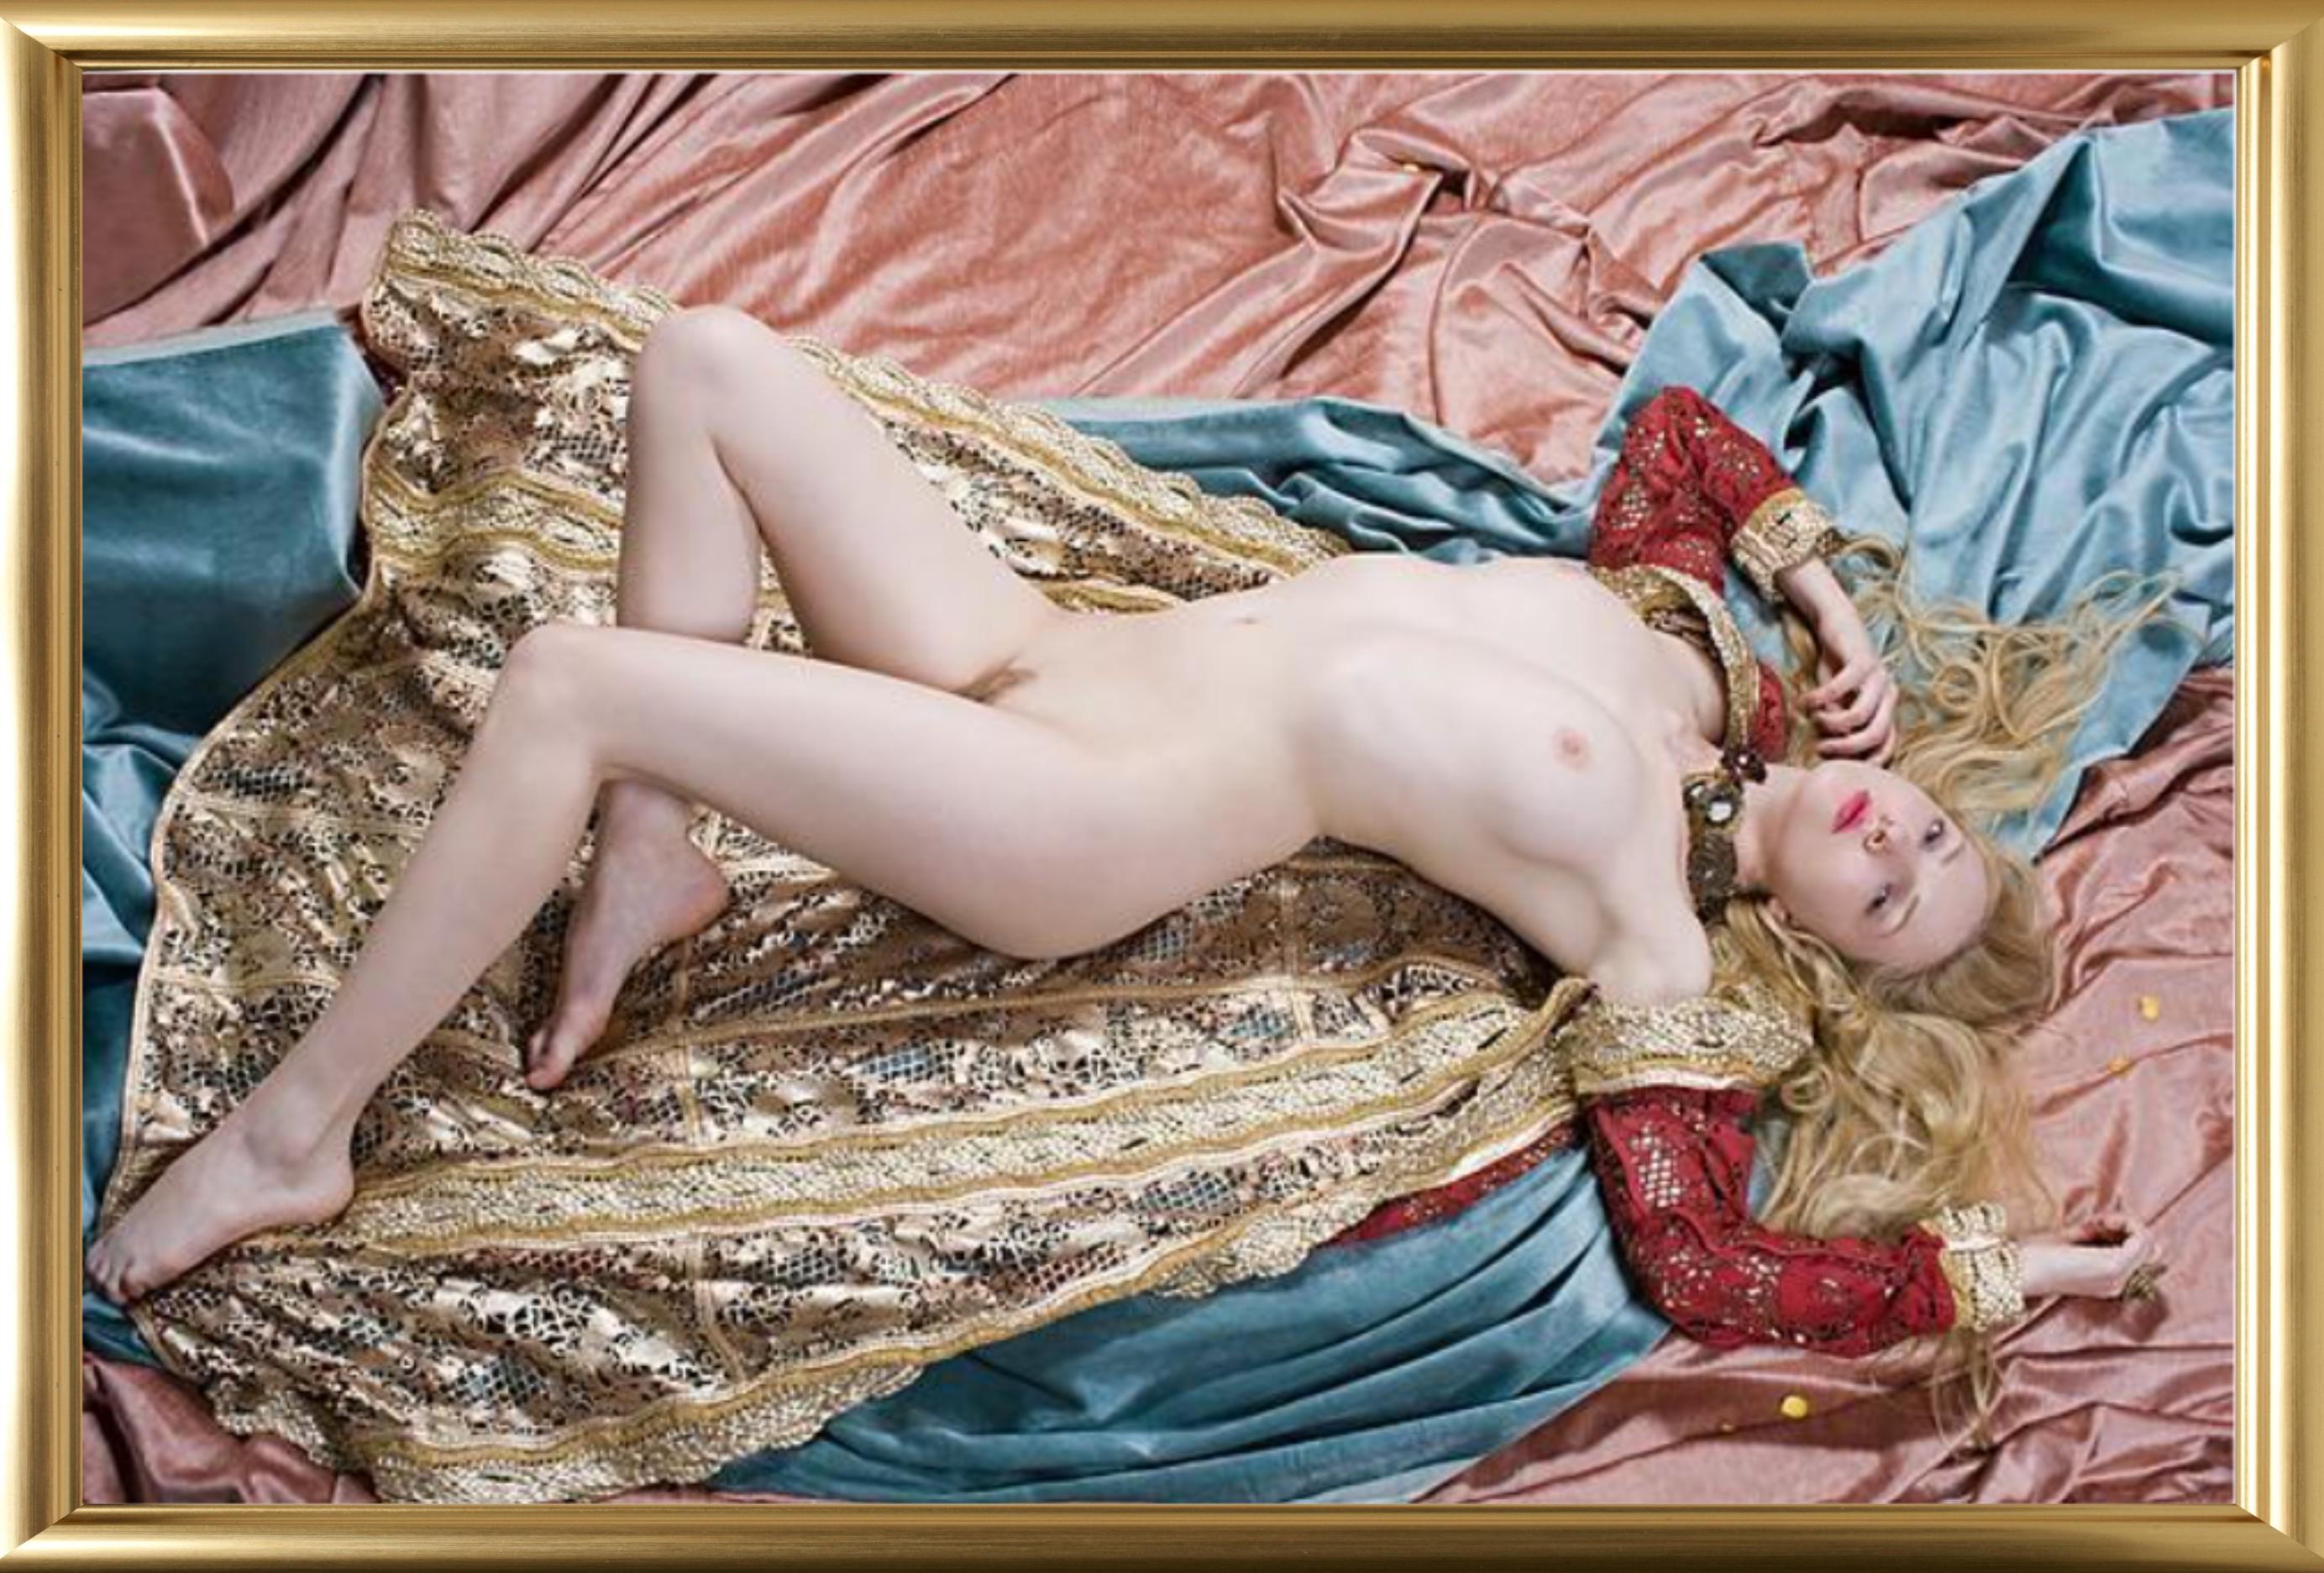 Lying Nude, NYC - nude model between fabrics, fine art photography, 2007 - Brown Color Photograph by Iris Brosch